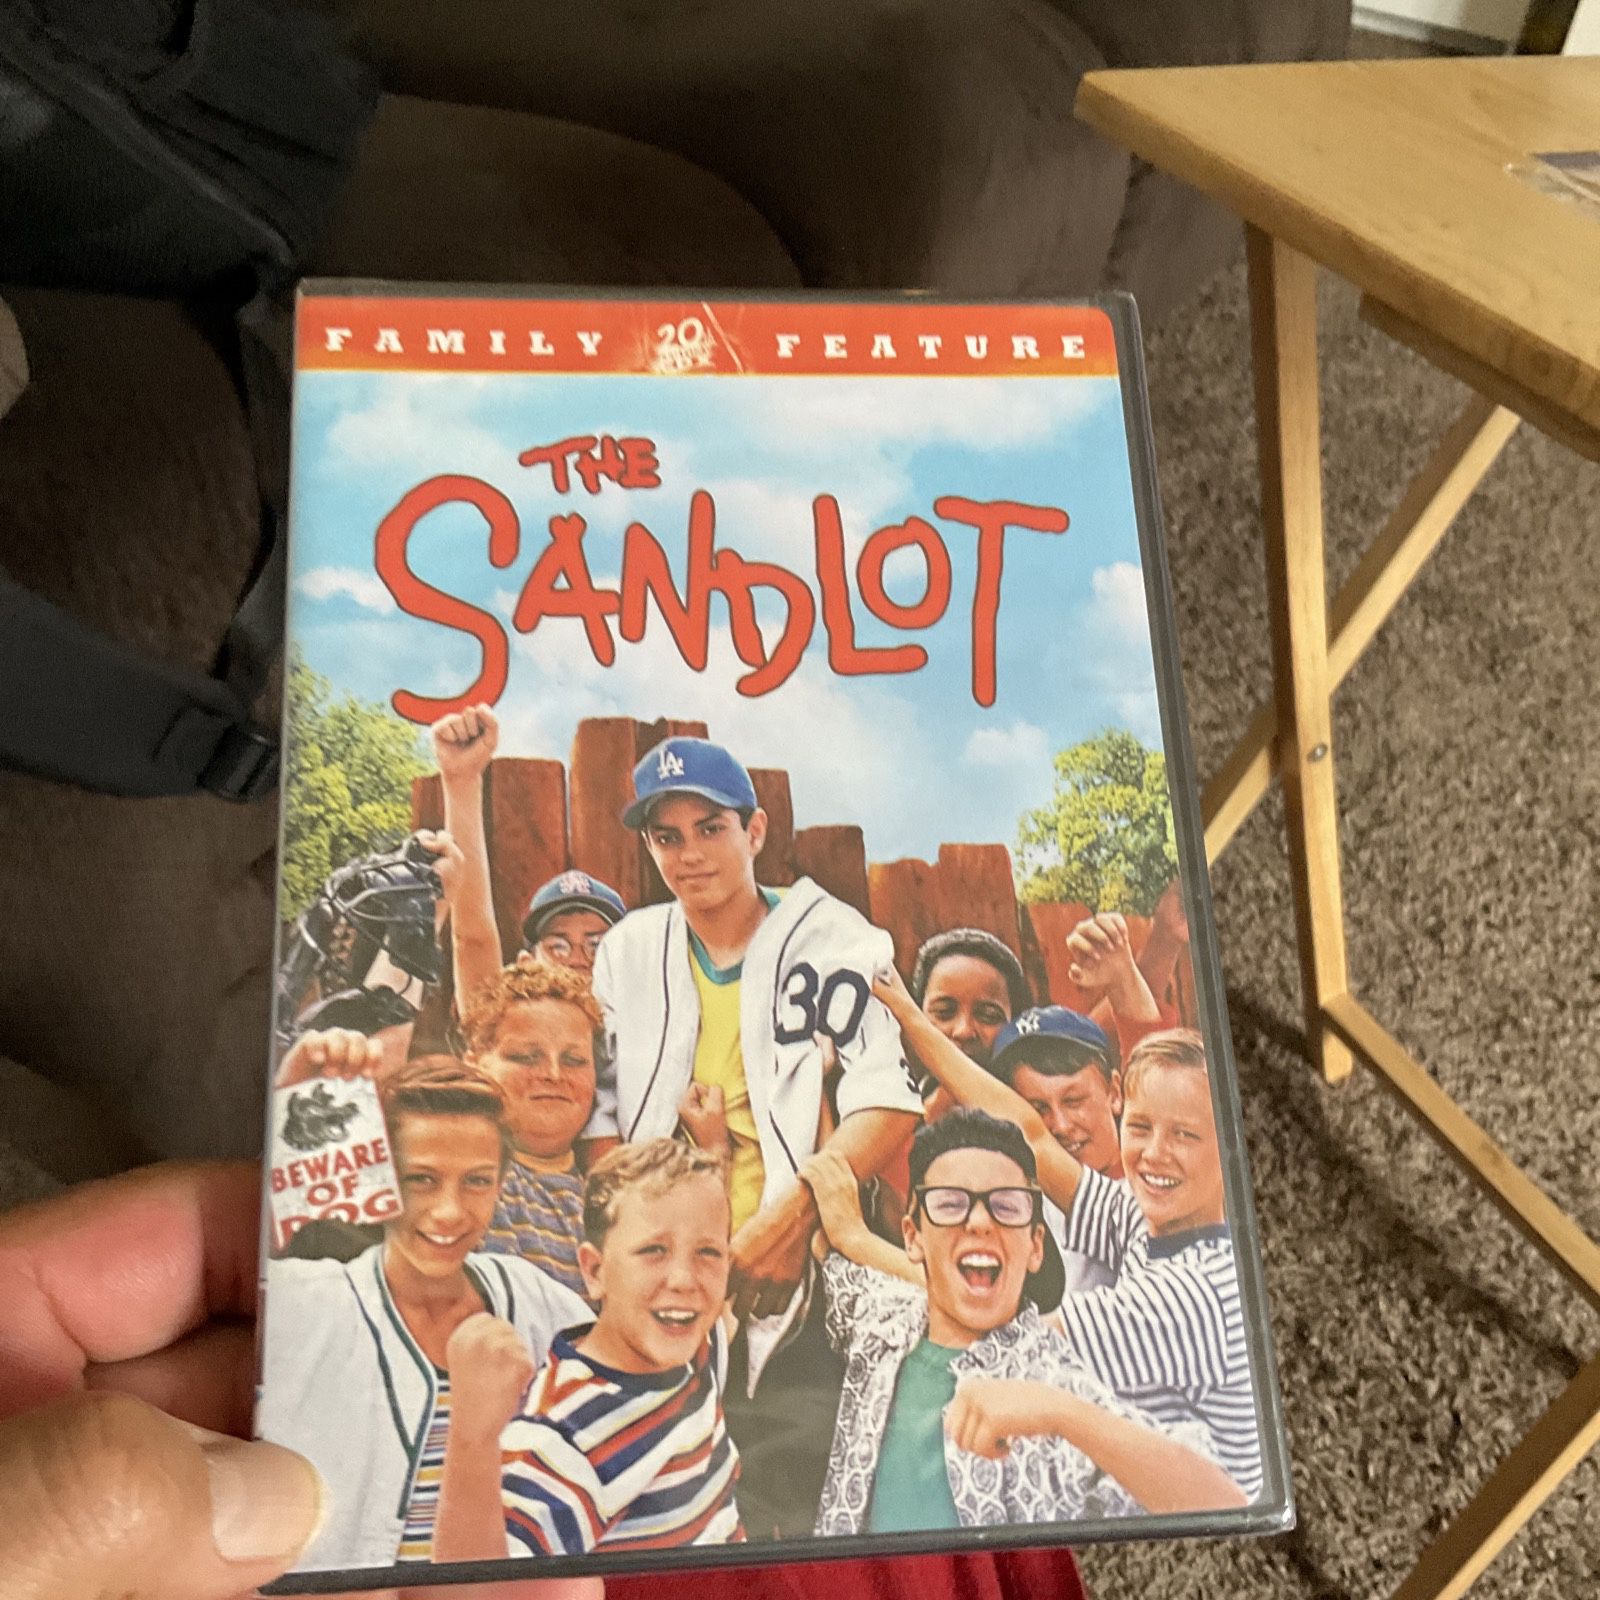 Factory SEALED The Sandlot (DVD, 2006, Widescreen Sensormatic)NEW Family Feature